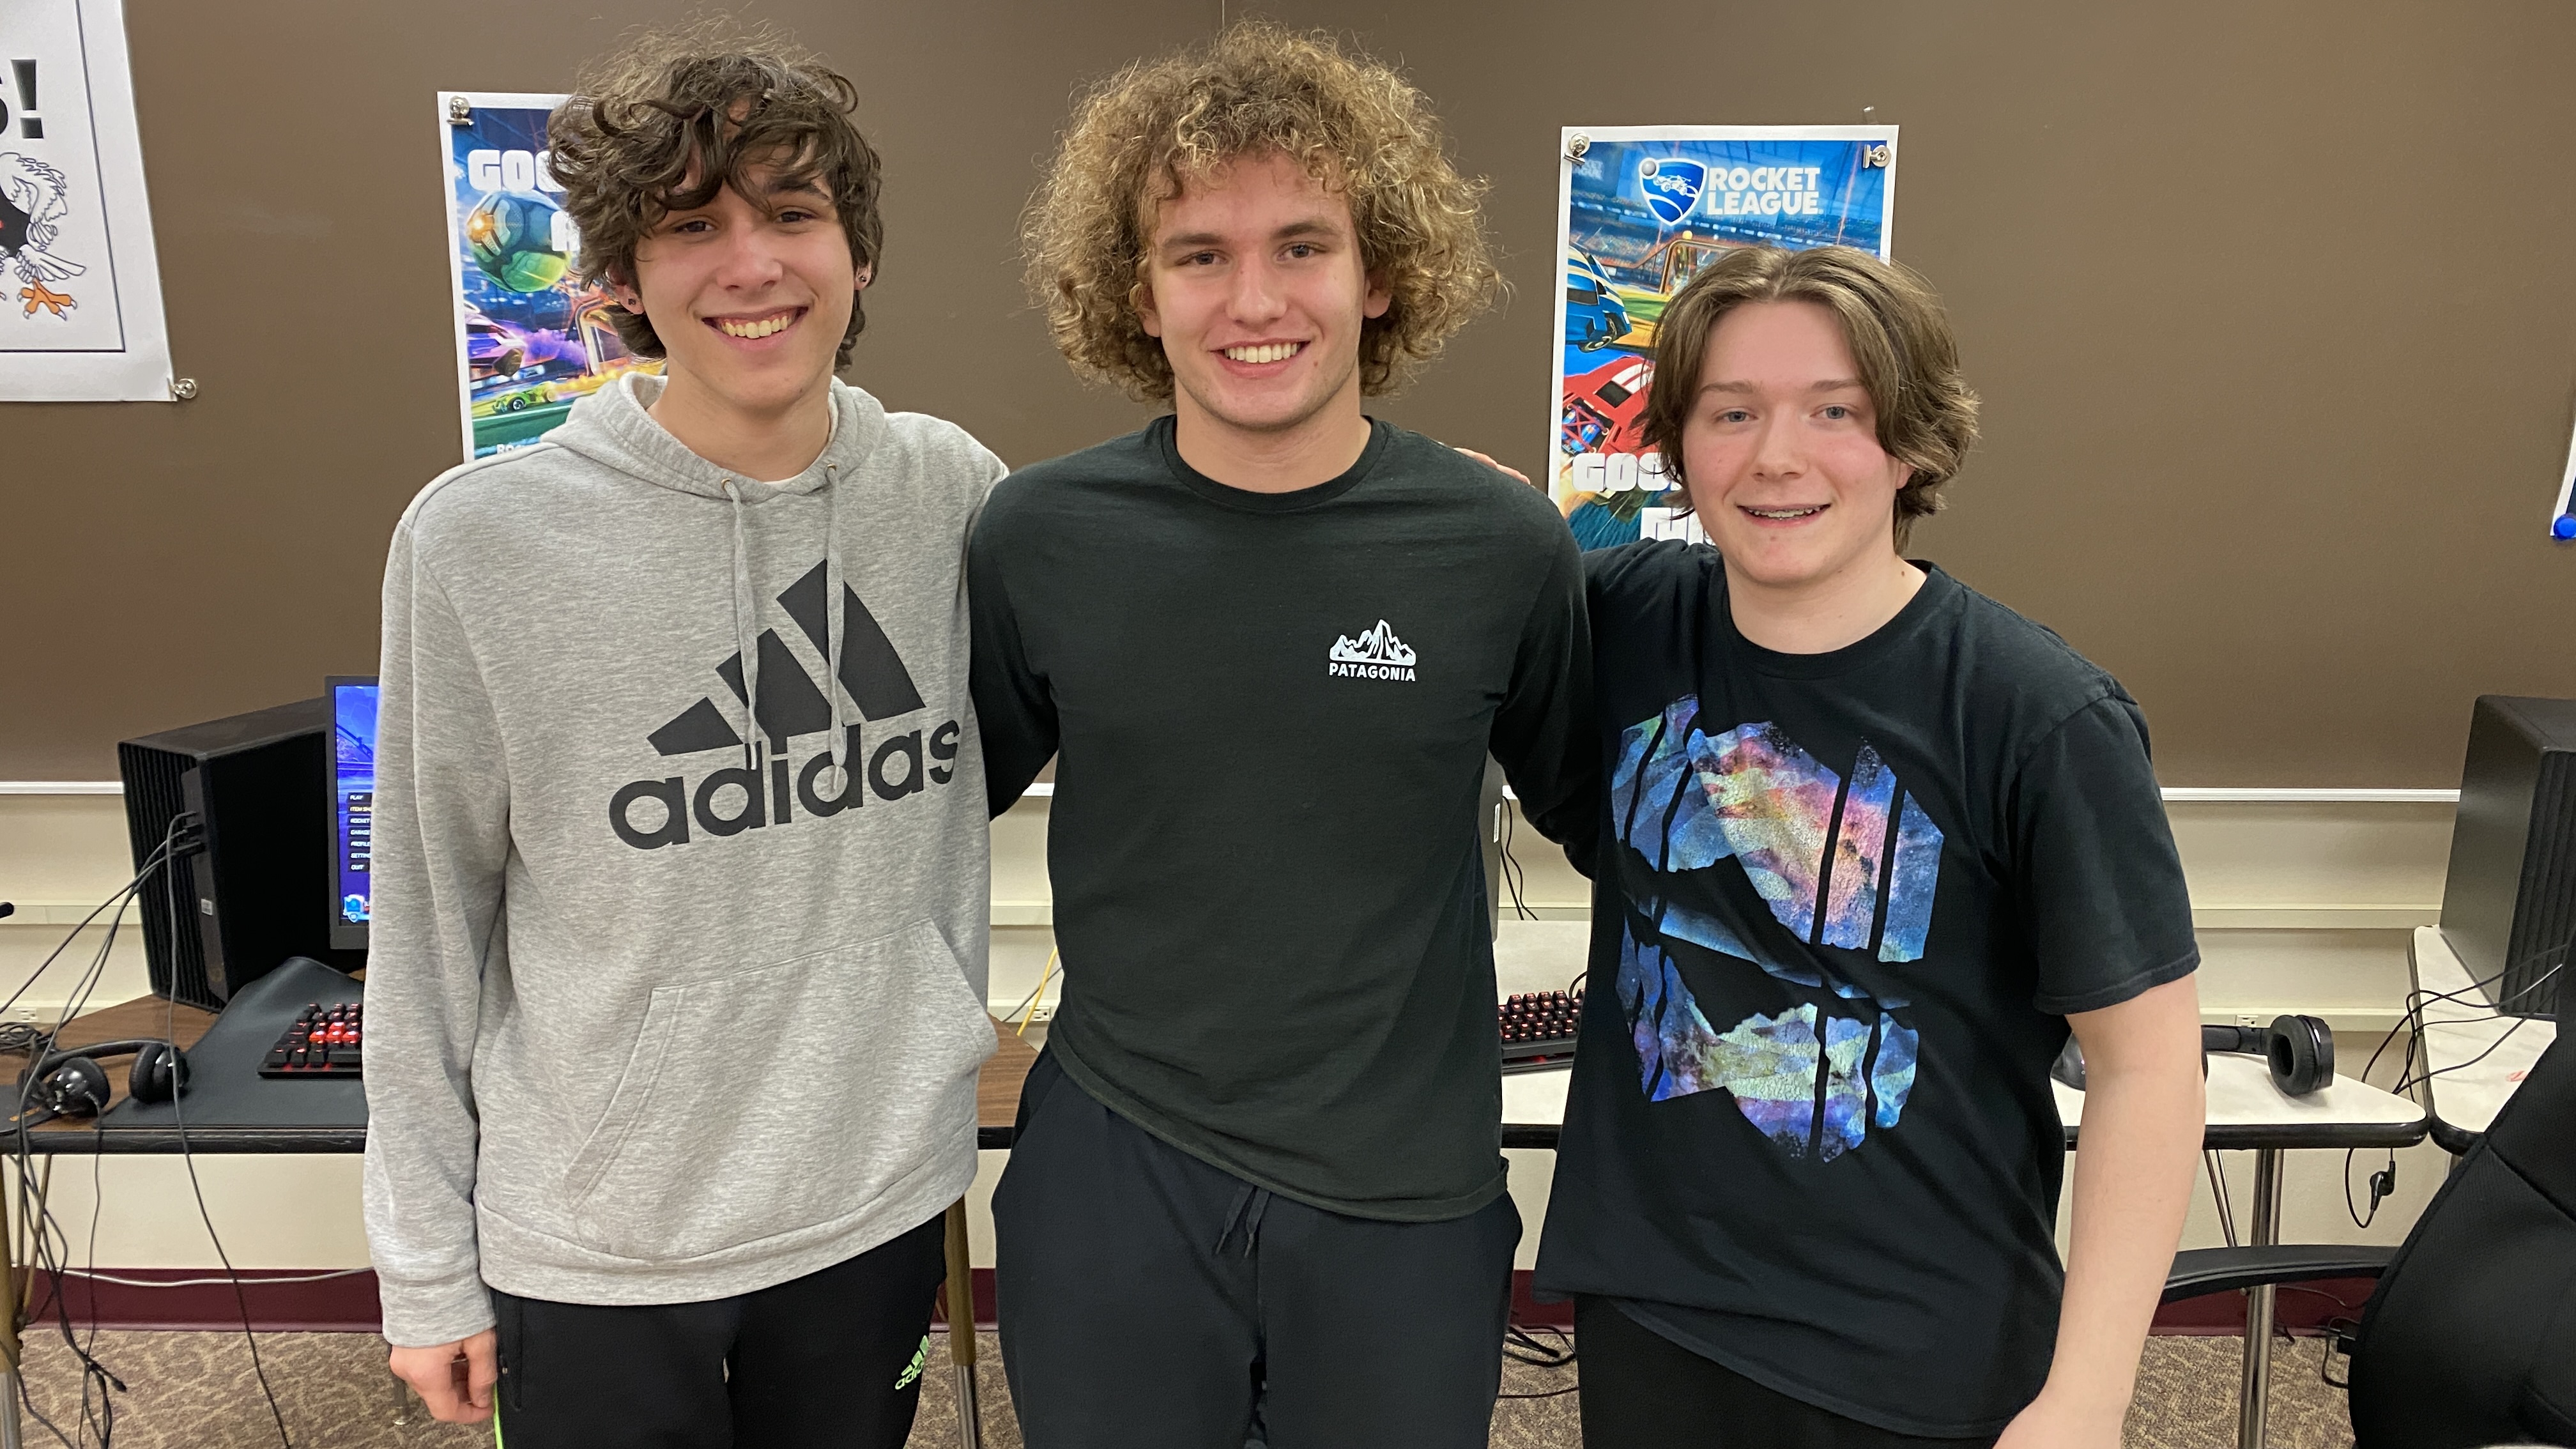 Alex, Max and Nick 3 players smiling 